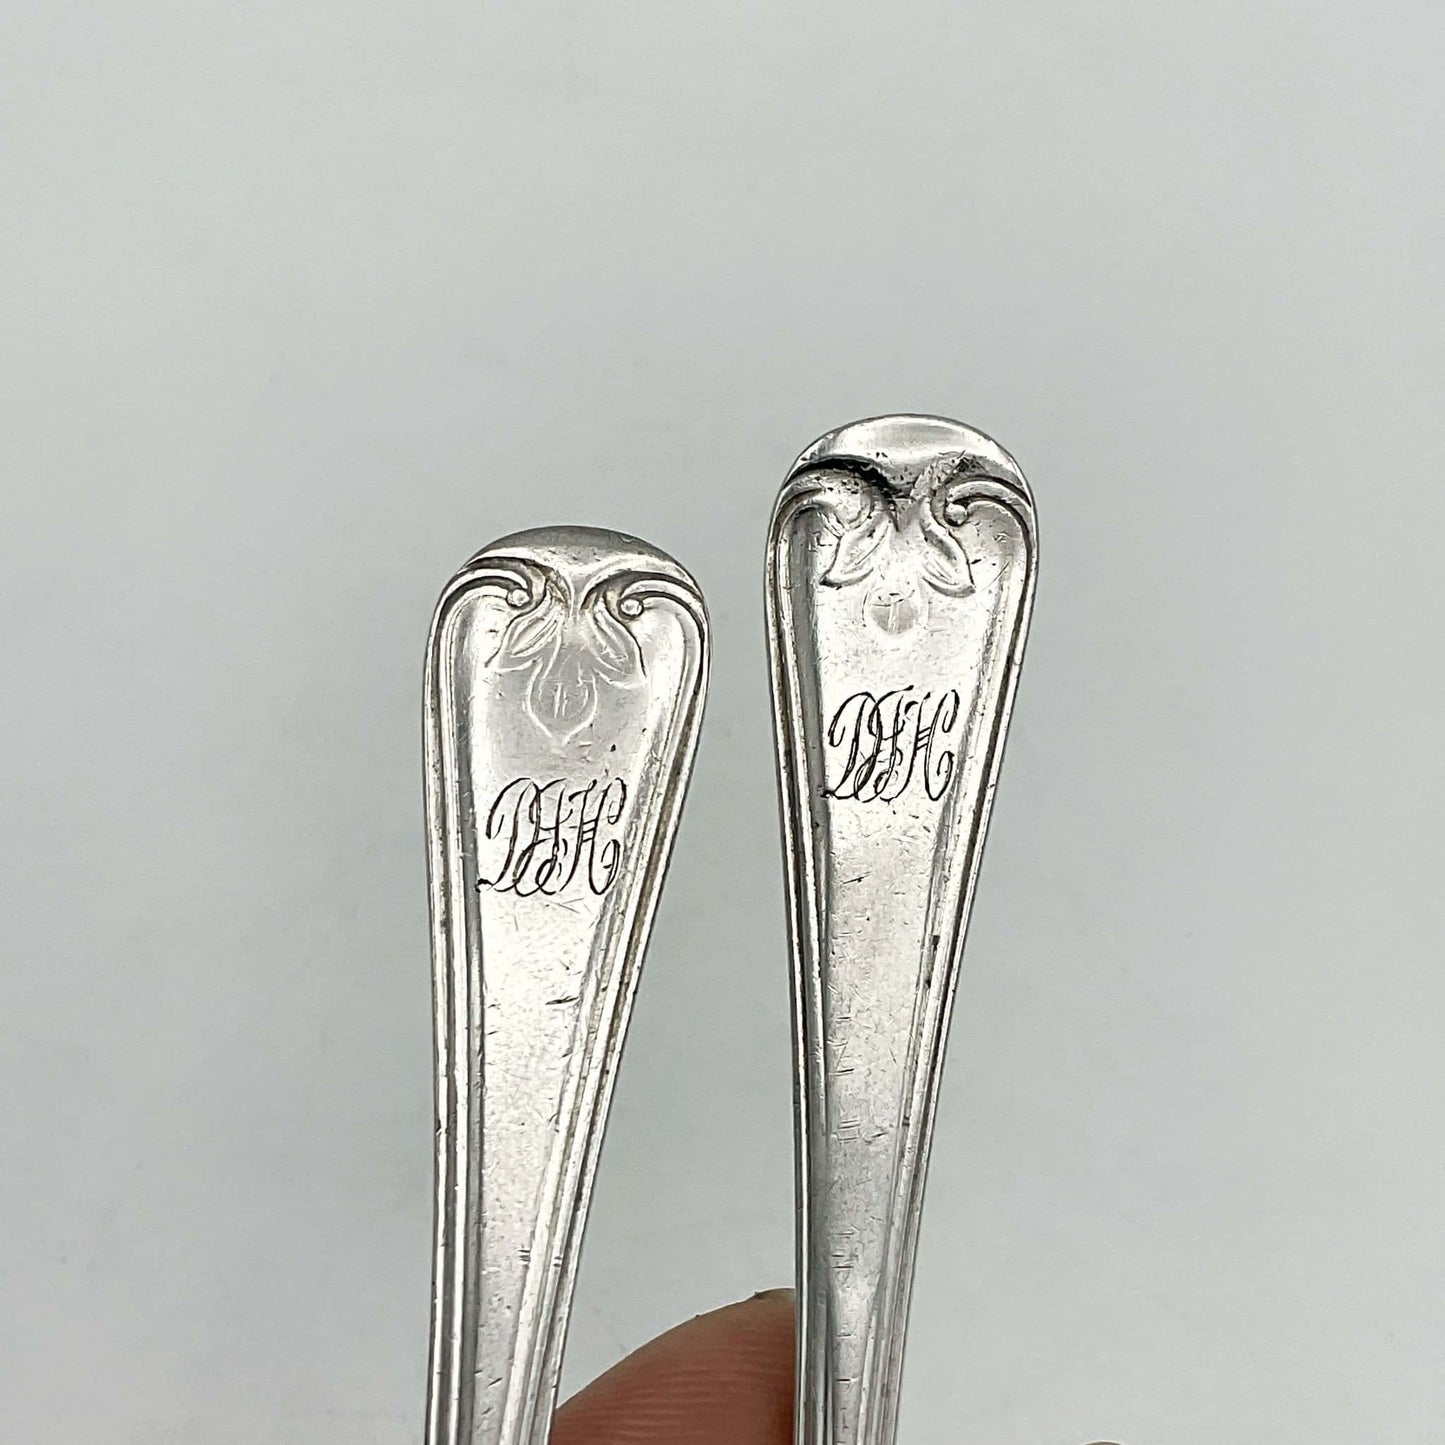 Tops of the silver handles showing DJH engraved